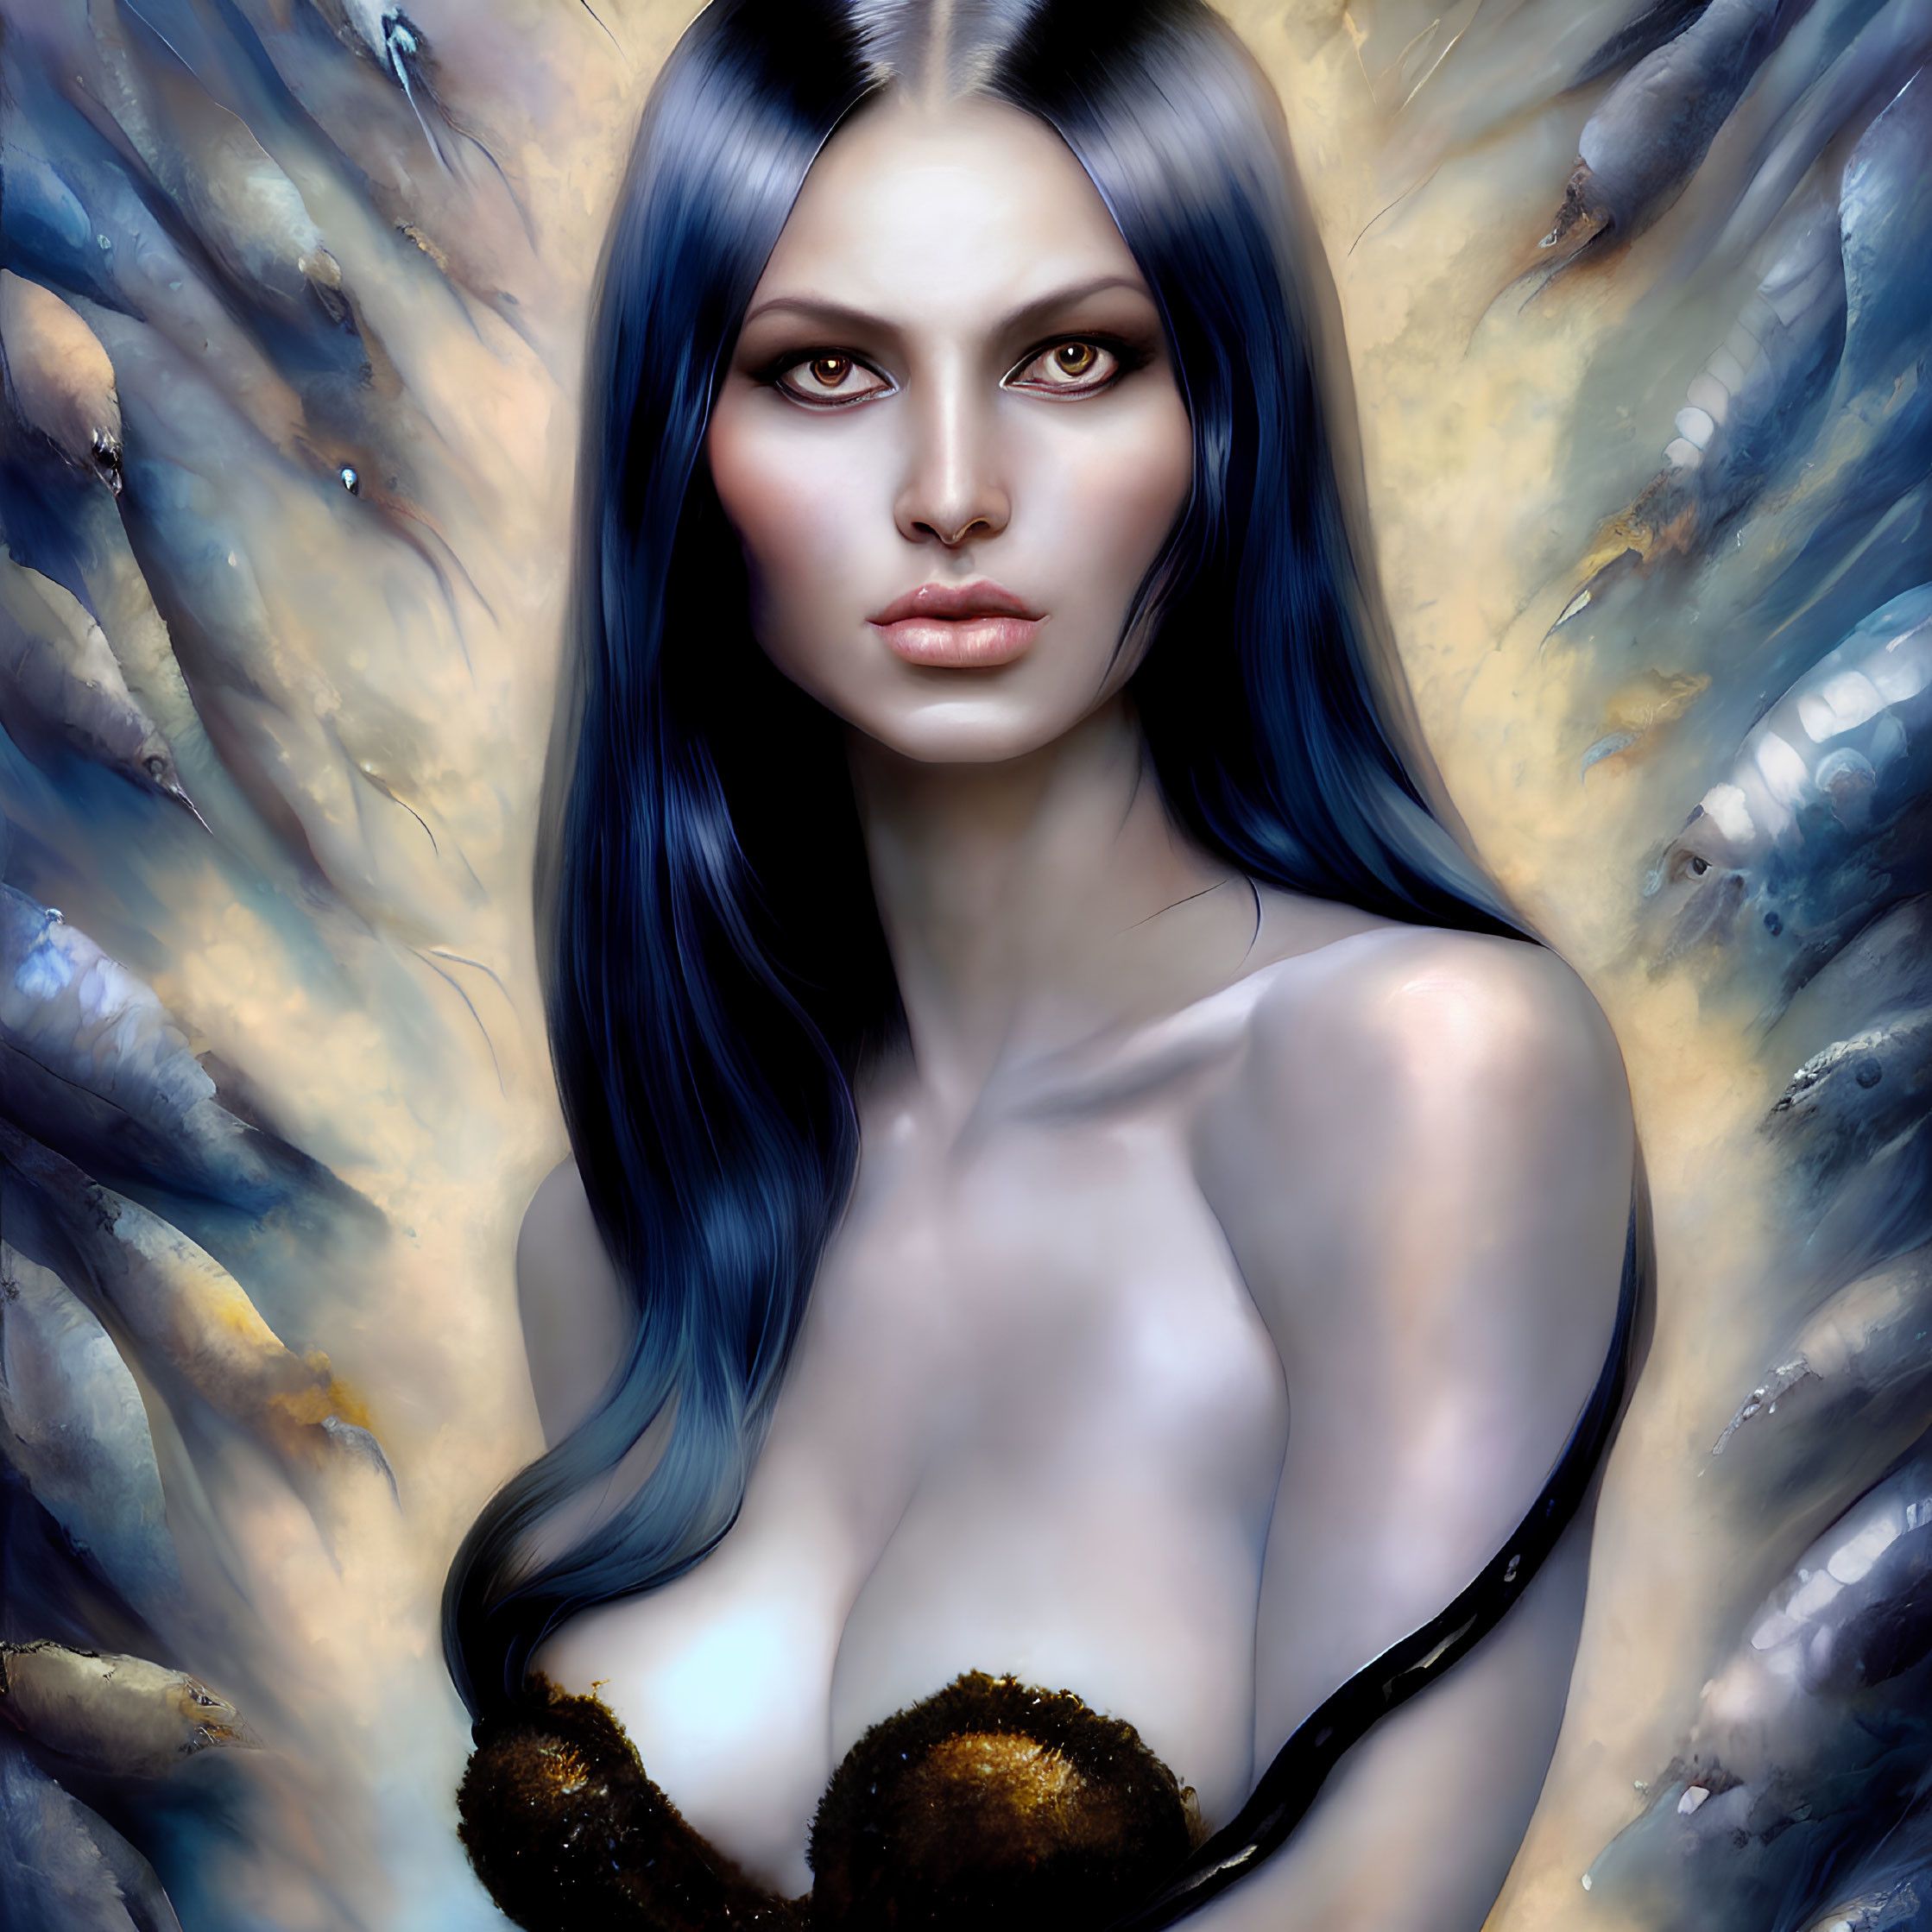 Digital painting: Woman with blue hair in surreal golden abstract background